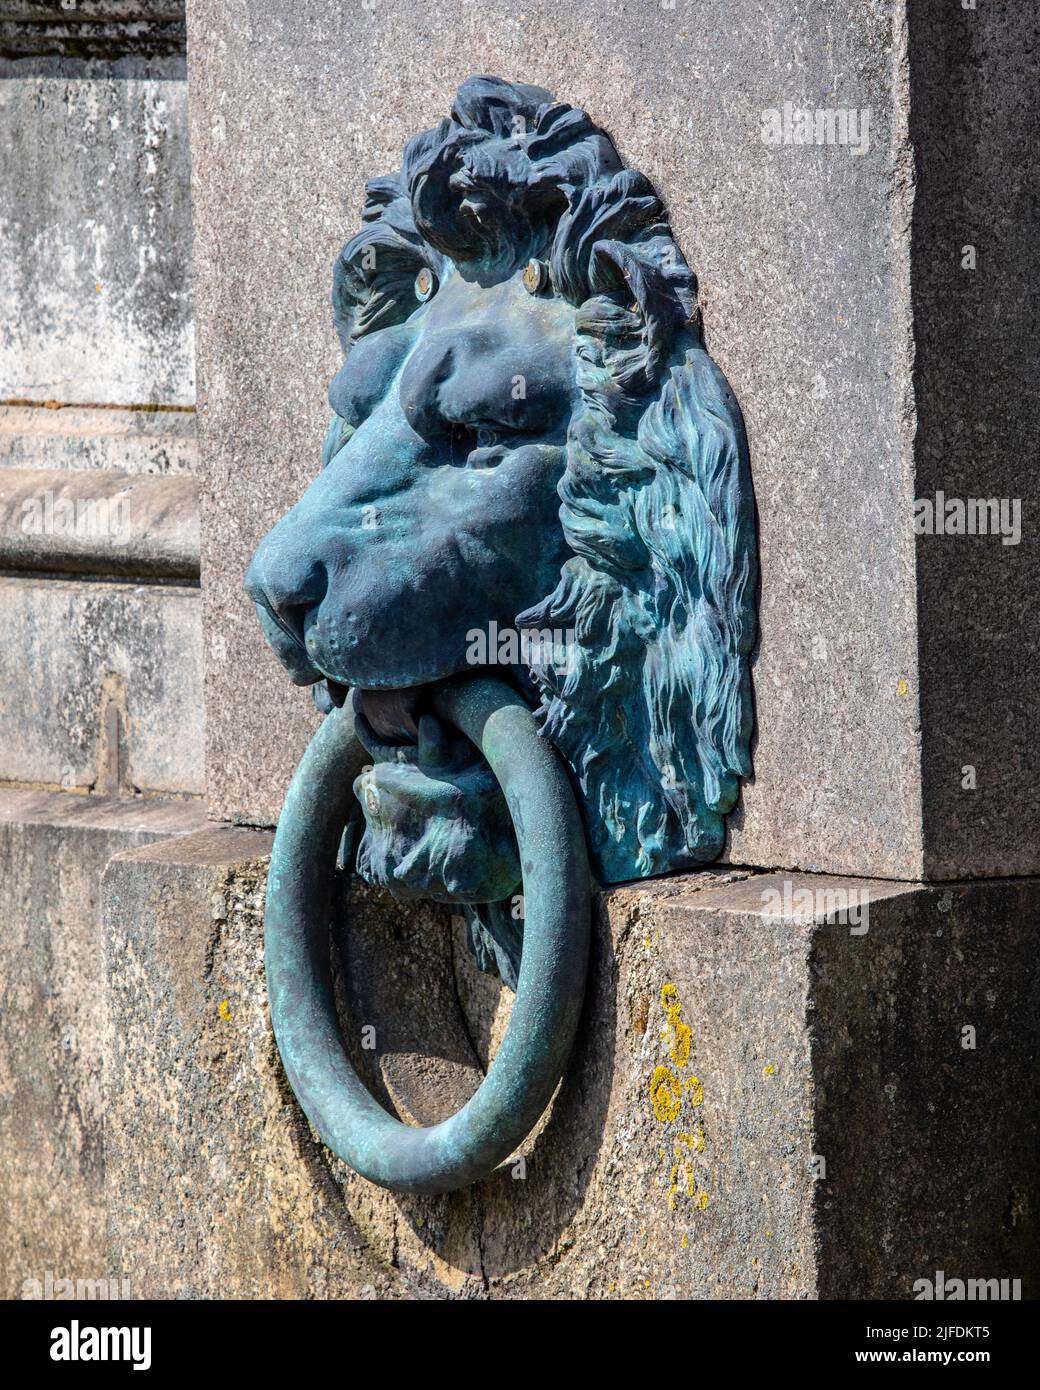 An ornate Lion head mooring ring on the River Thames in central London, UK. Stock Photo